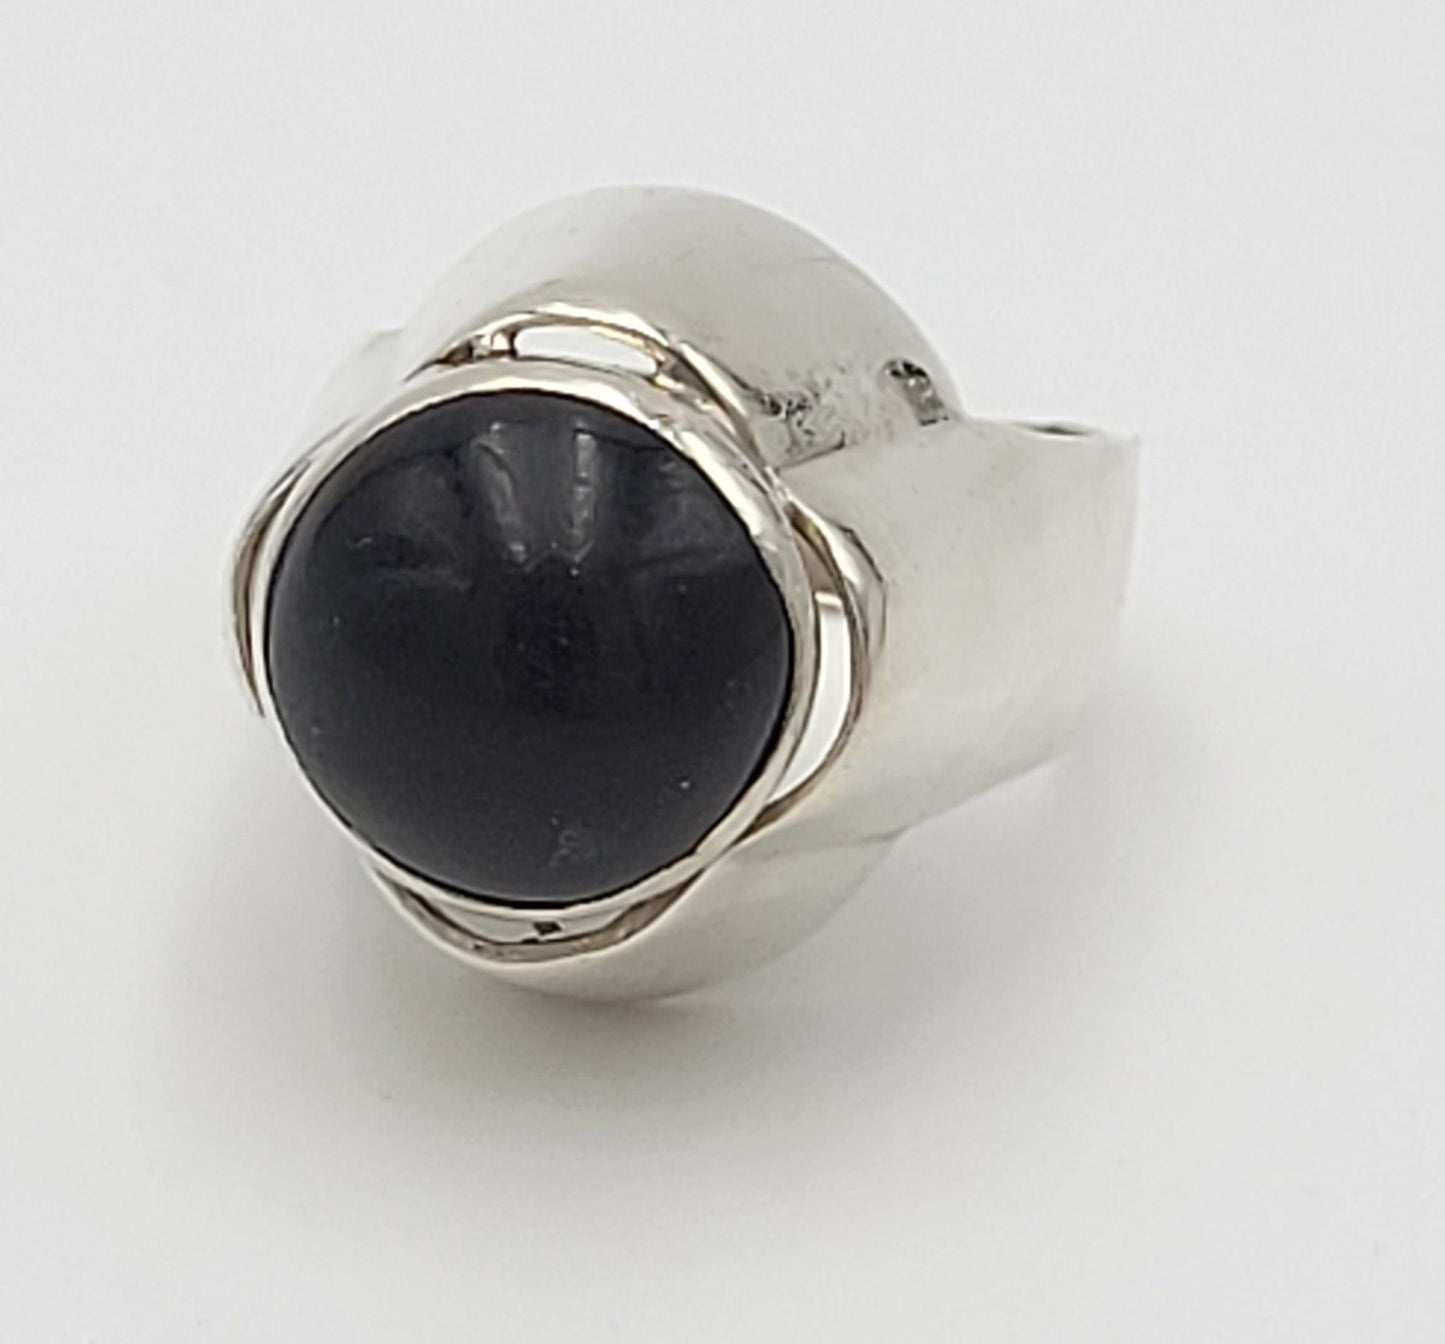 Israel Sterling Jewelry Designer Sterling Silver & Onyx Huge Statement Cocktail Ring Signed 1960's